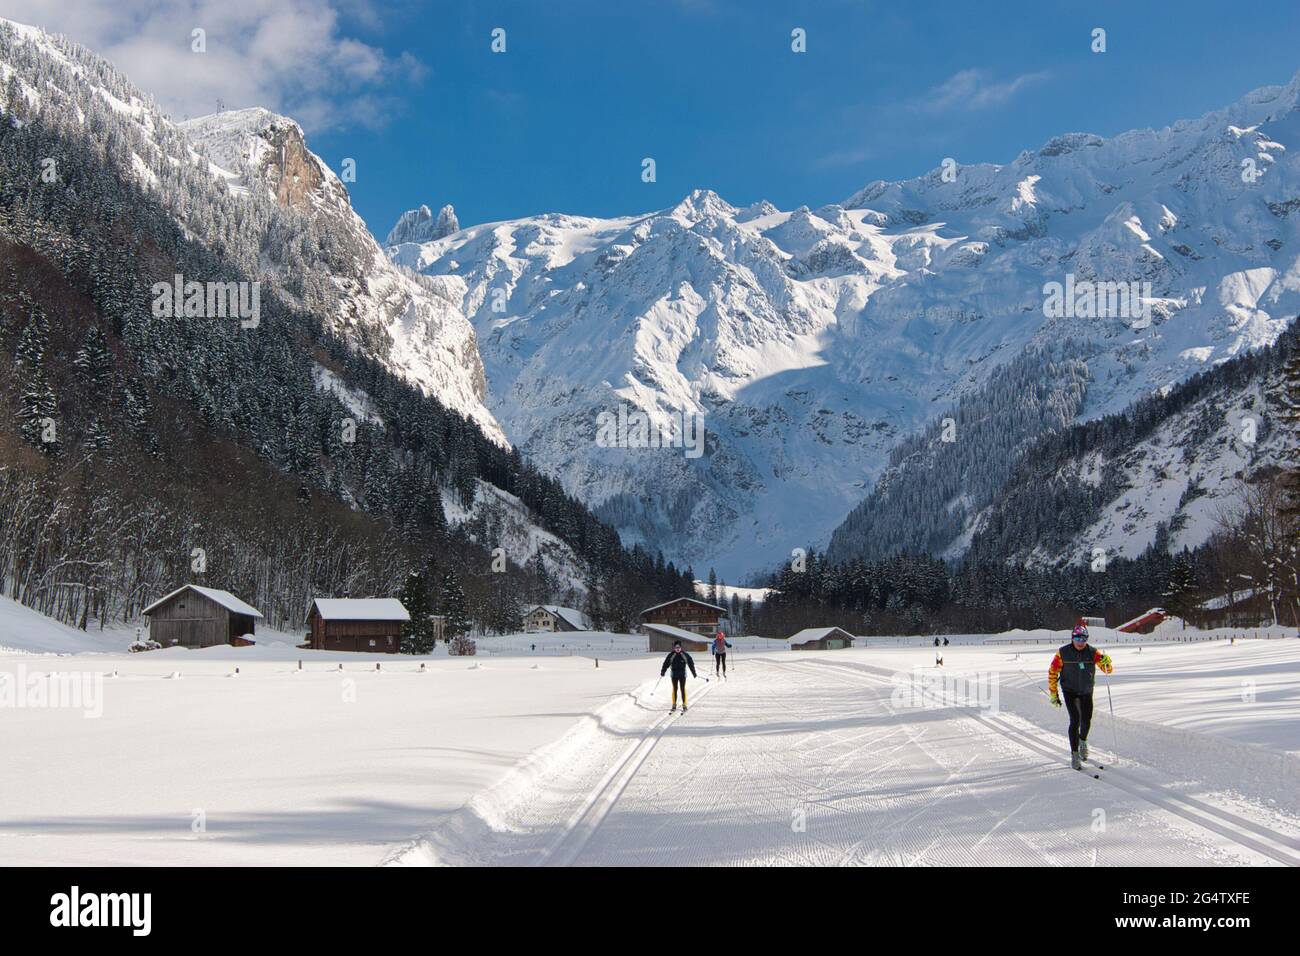 Mountain scenery at Engelberg in Obwalden canton, central Switzerland with distant people langlauf skiing in a flat area between the mountains Stock Photo